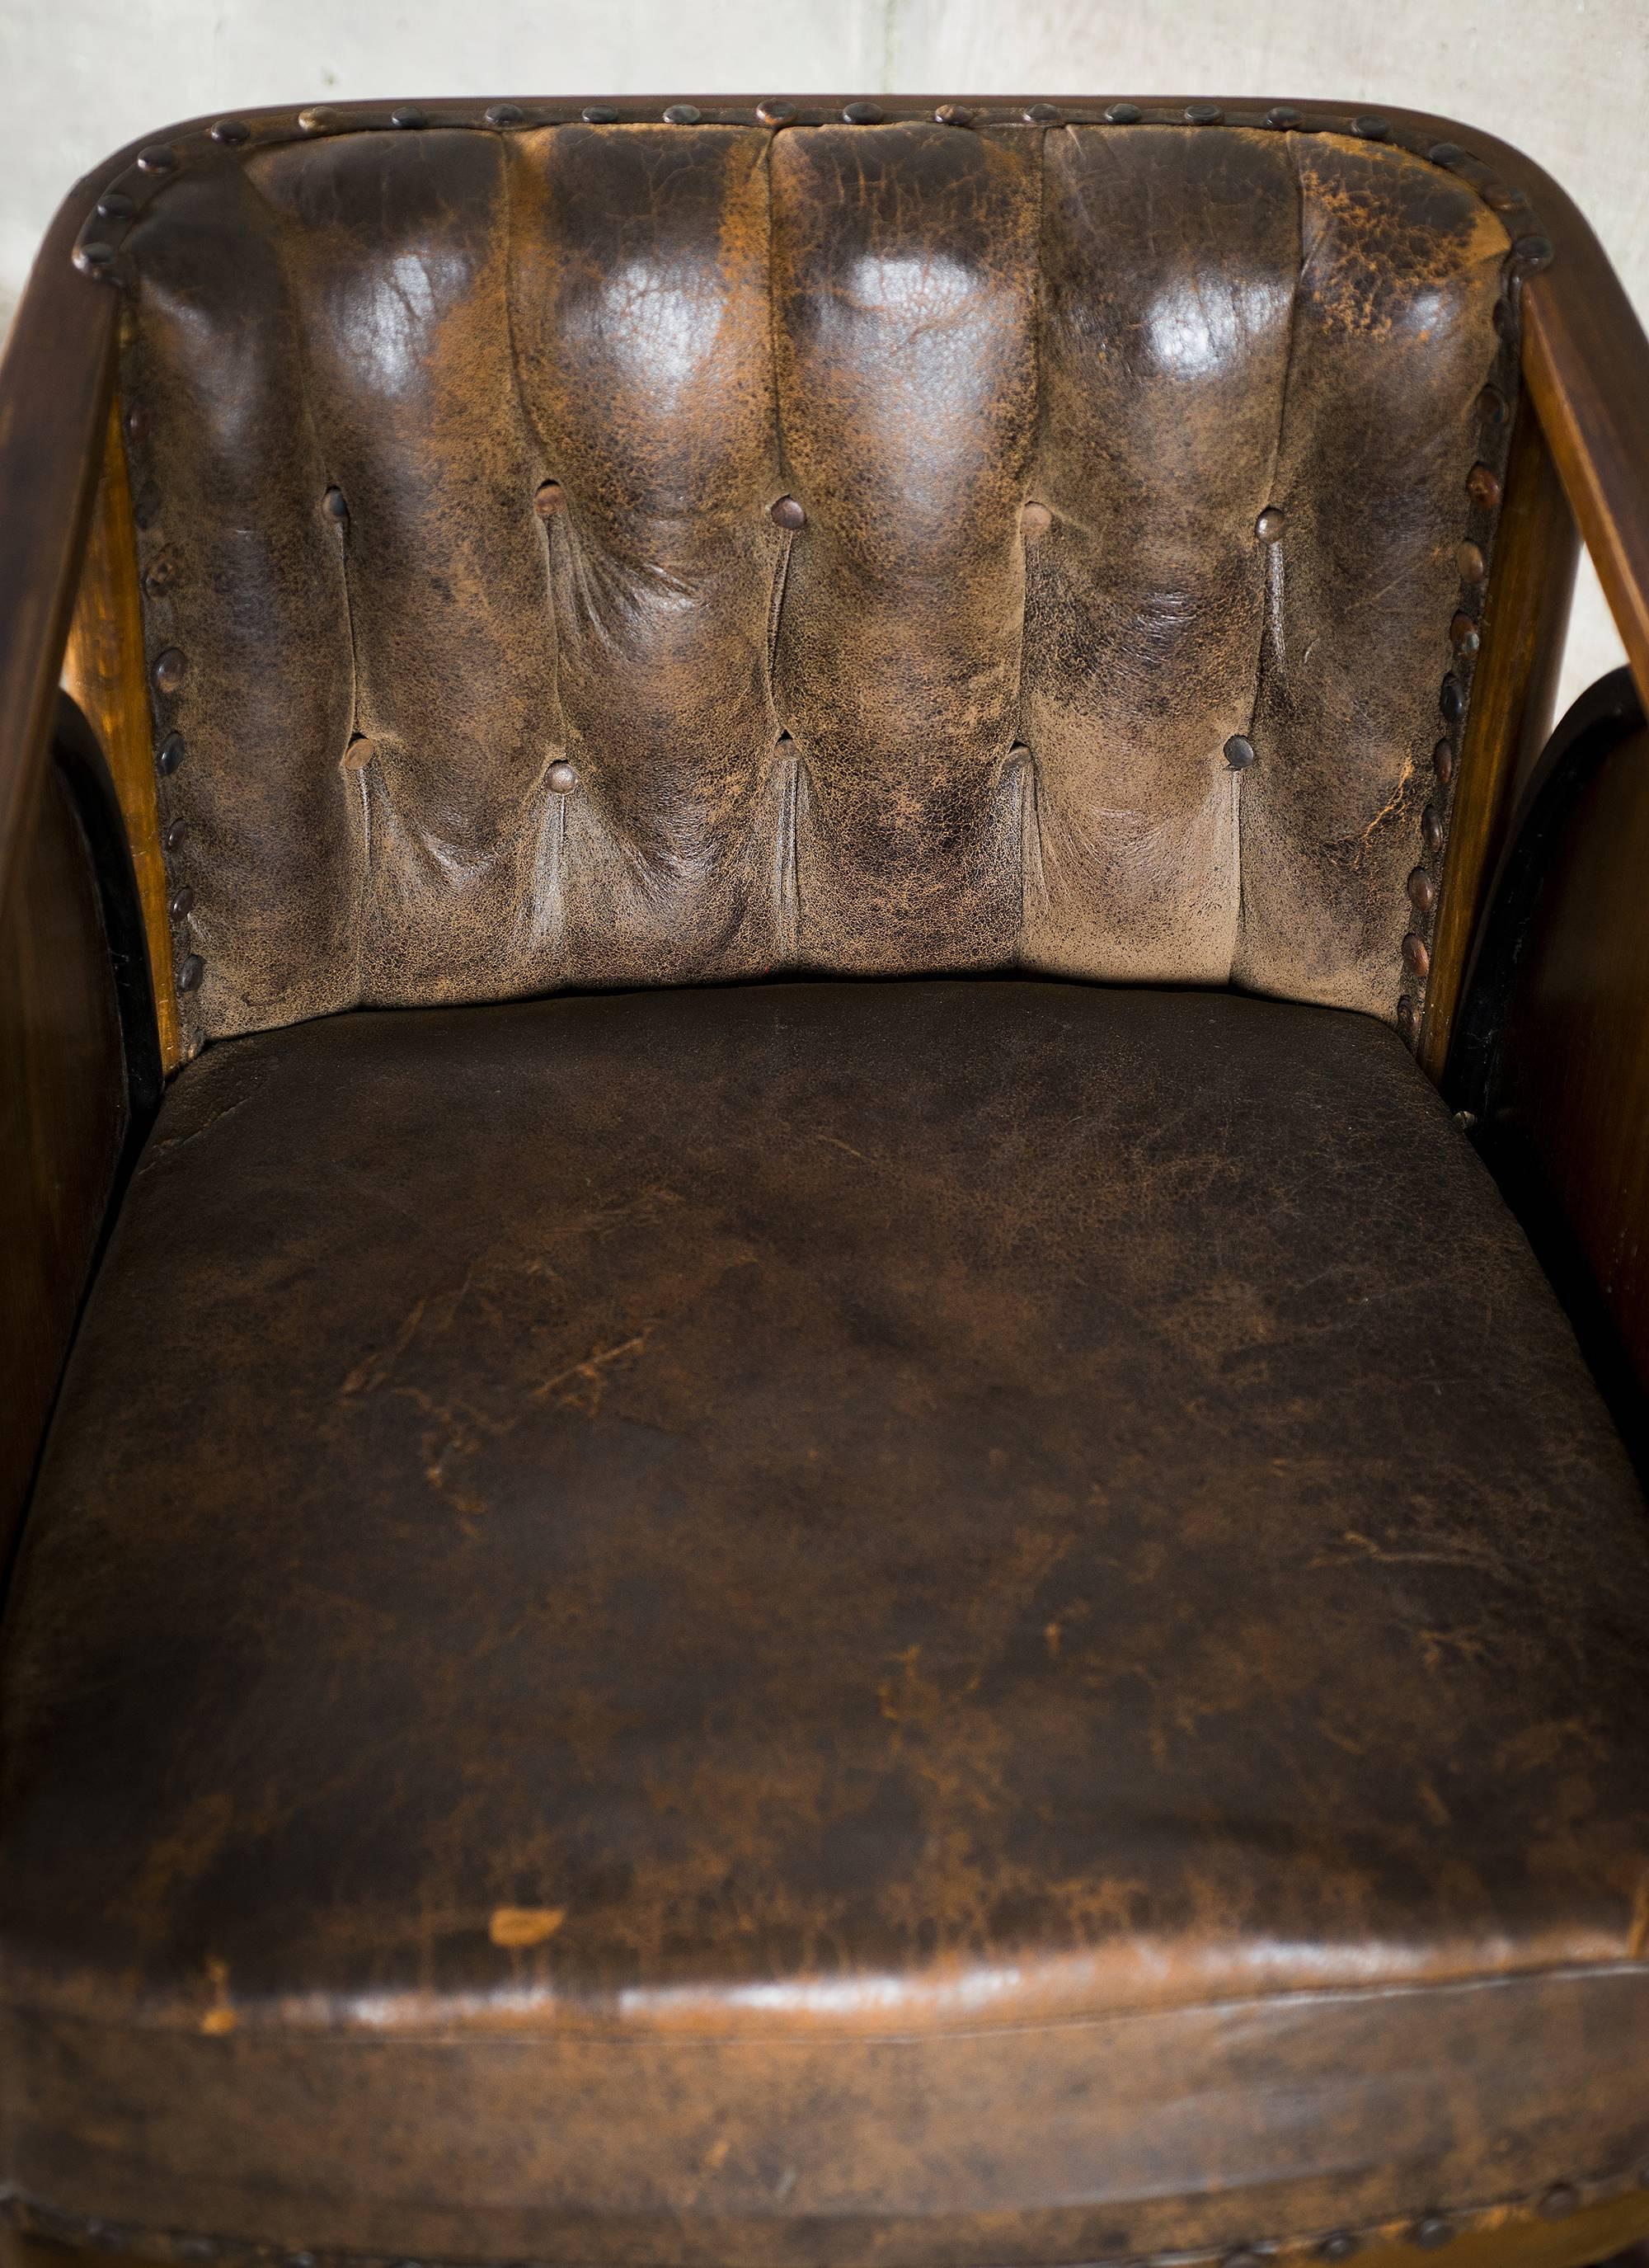 Austrian Kolomon Moser or Josef Hoffman Armchair Beechwood, Marquetry and Leather, 1907 For Sale